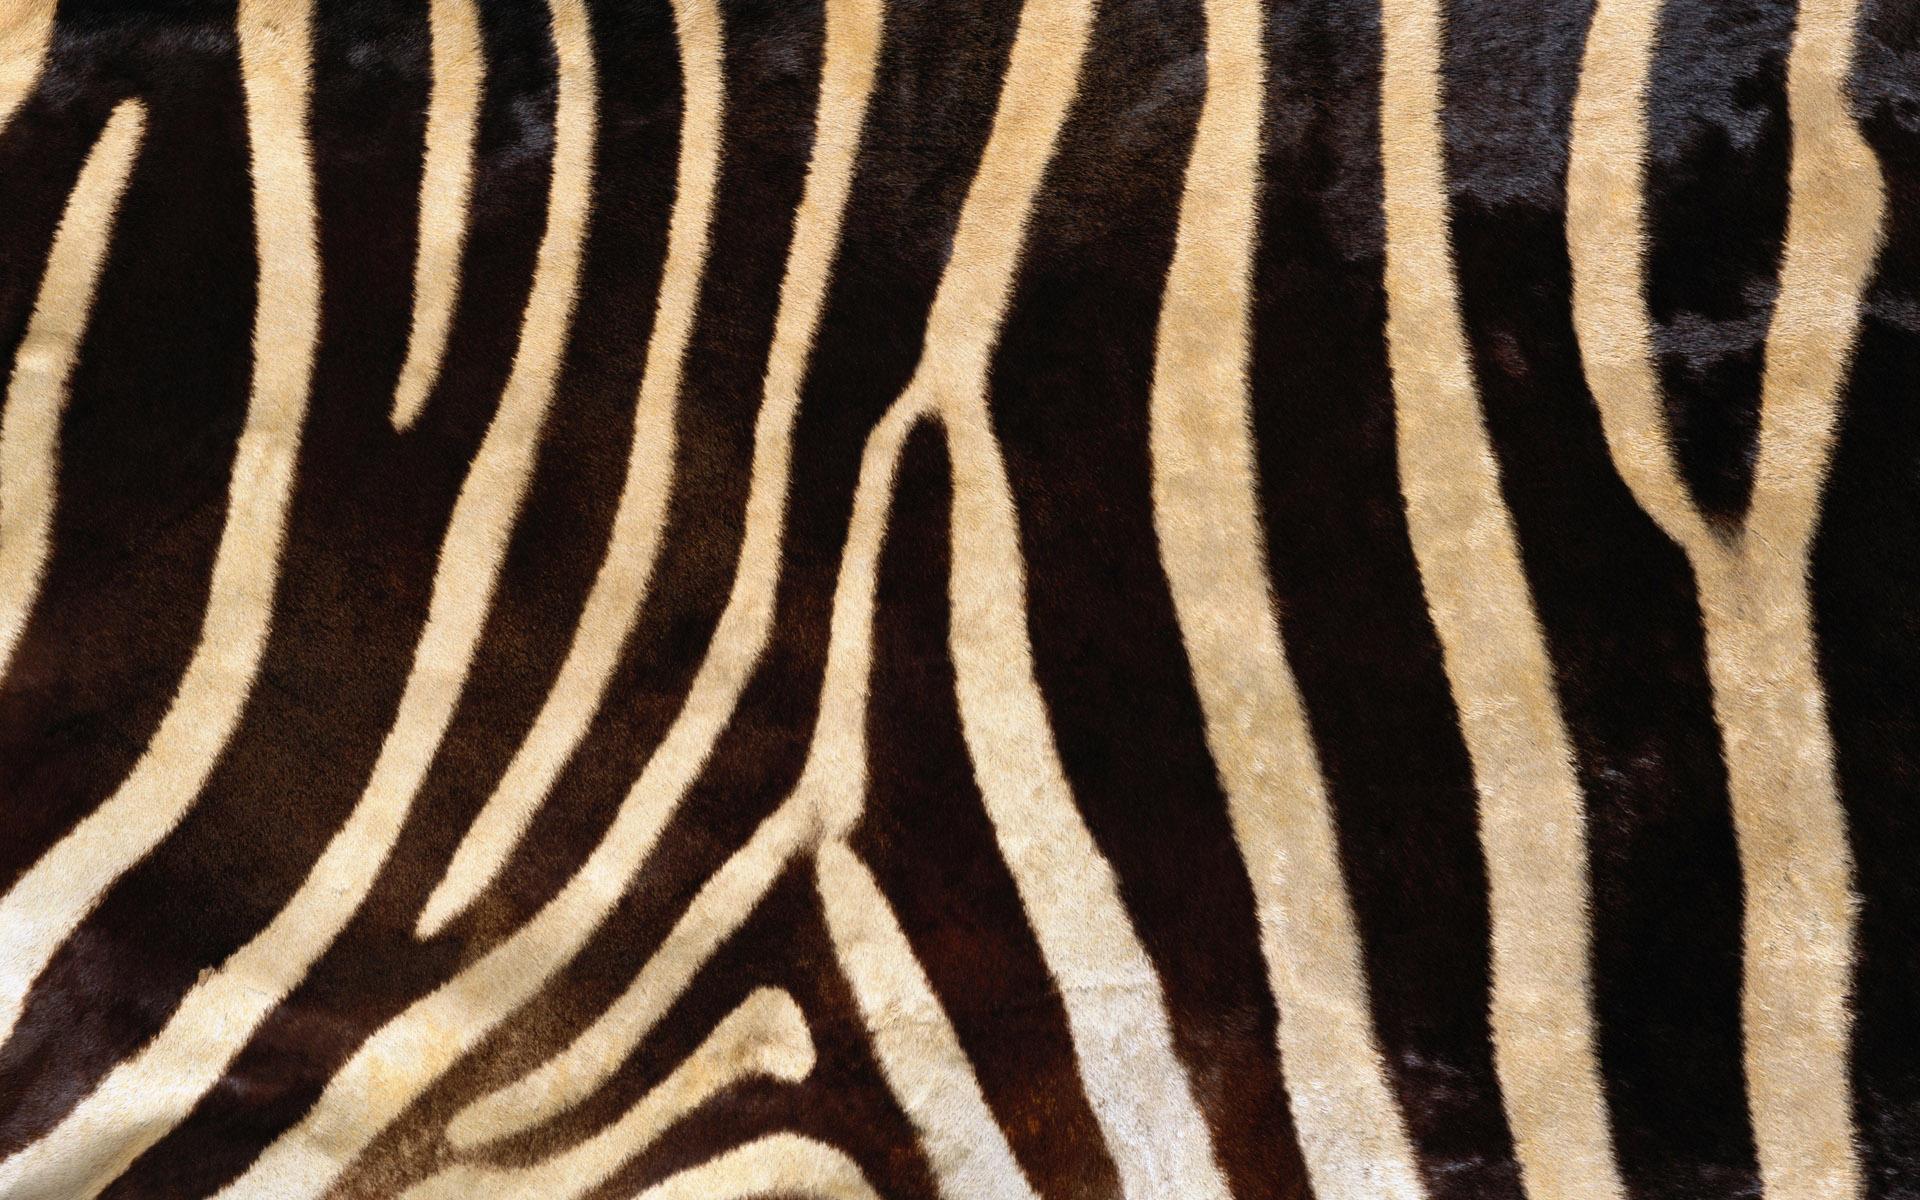 Real Animal Skin Textures in High Definition